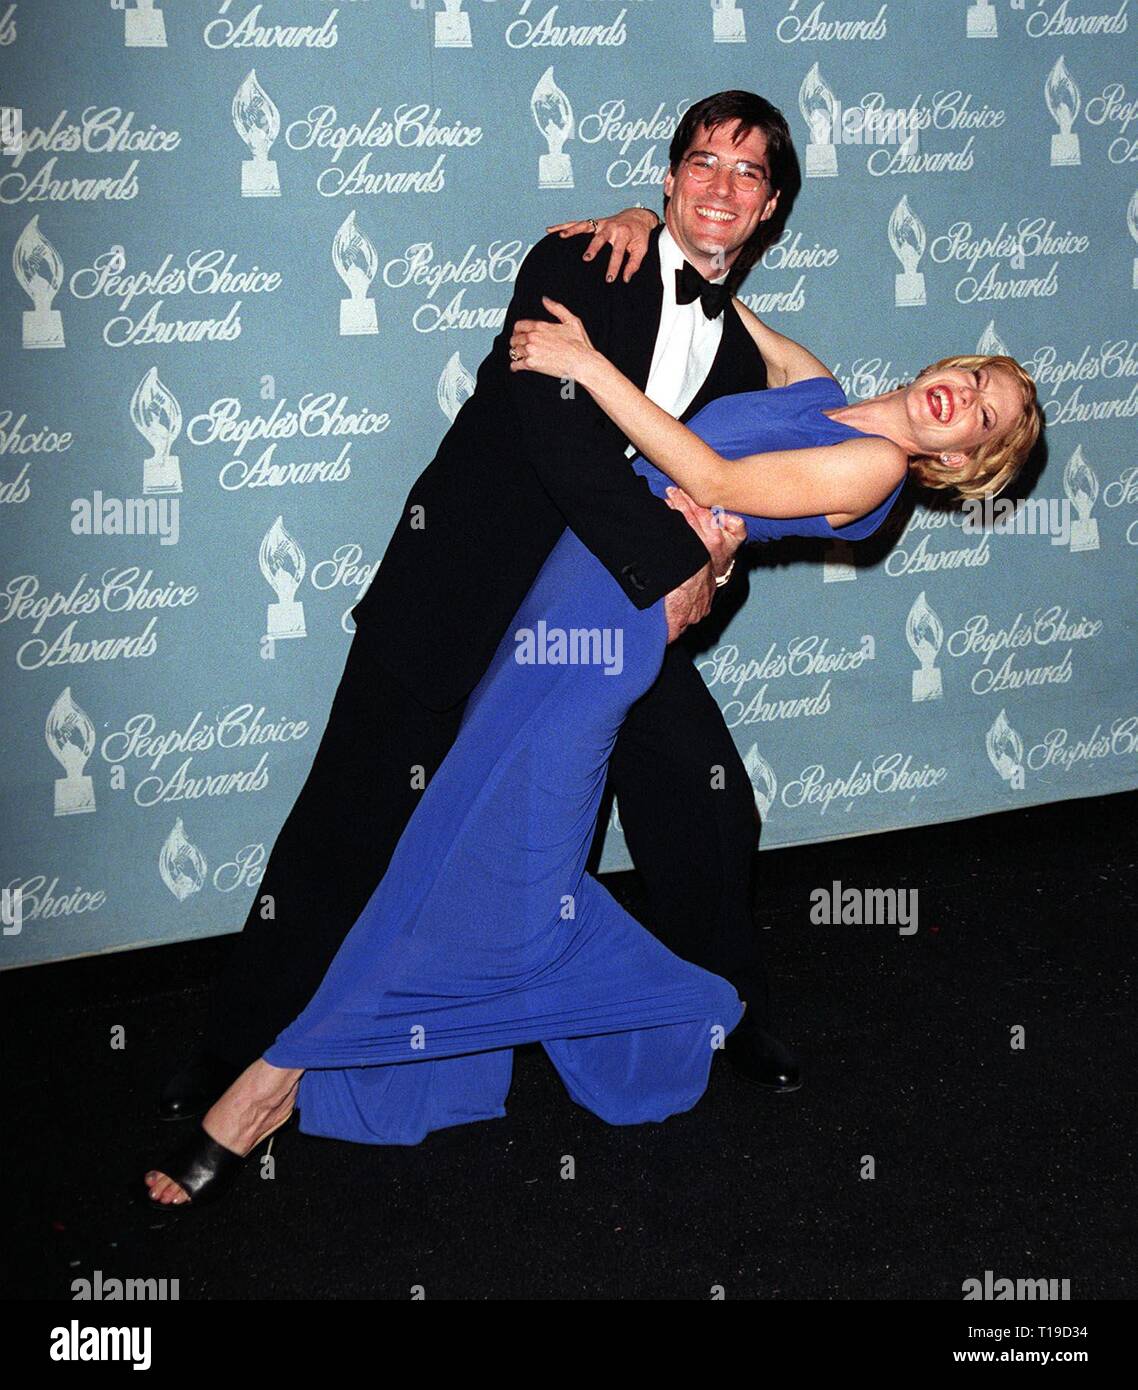 LOS ANGELES, CA - January 11, 1998: 'Dharma & Greg' stars THOMAS GIBSON & JENNA ELFMAN at the People's Choice Awards, in Los Angeles, where their series won the Favorite New TV Comedy  series award. Stock Photo